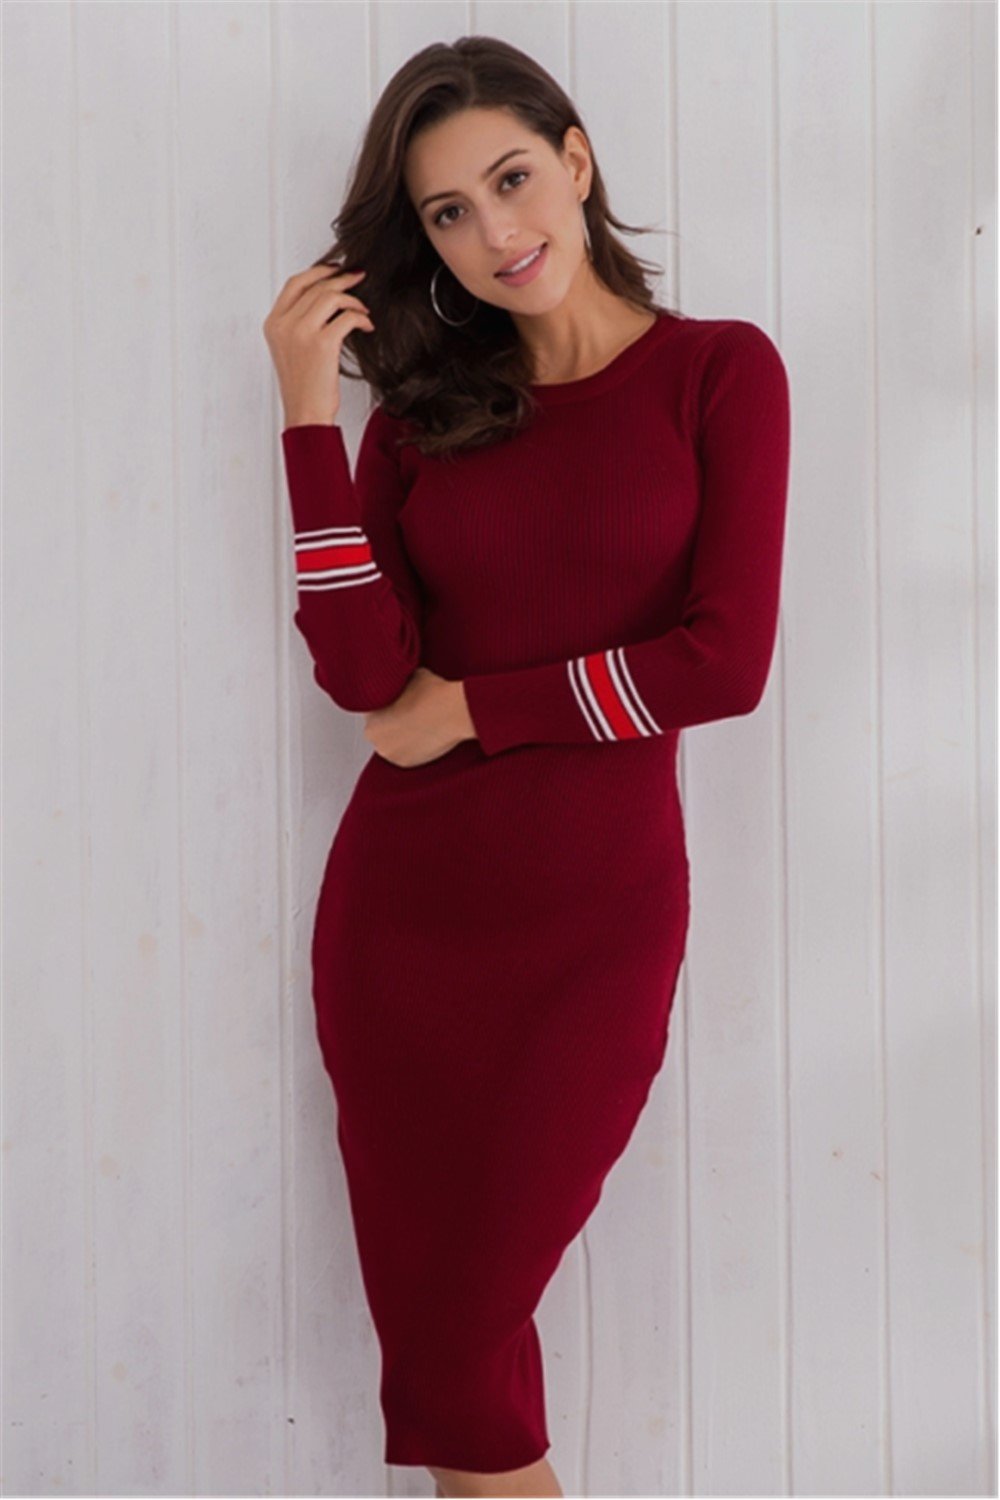 Long-sleeved Knit Bodycon Dress - Pavacat